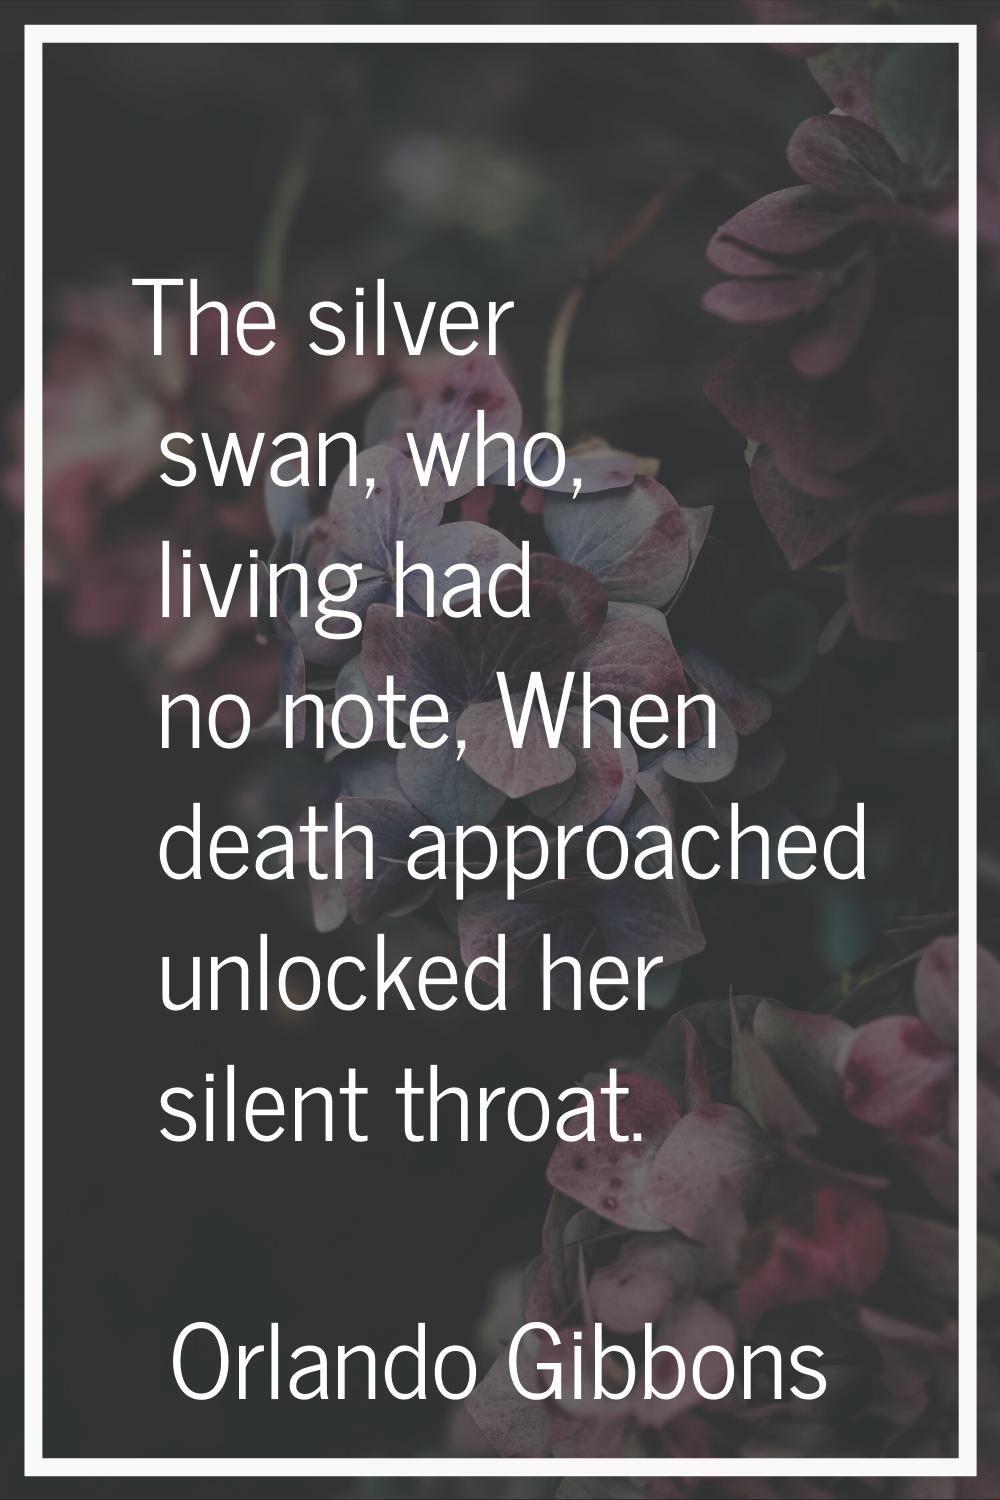 The silver swan, who, living had no note, When death approached unlocked her silent throat.